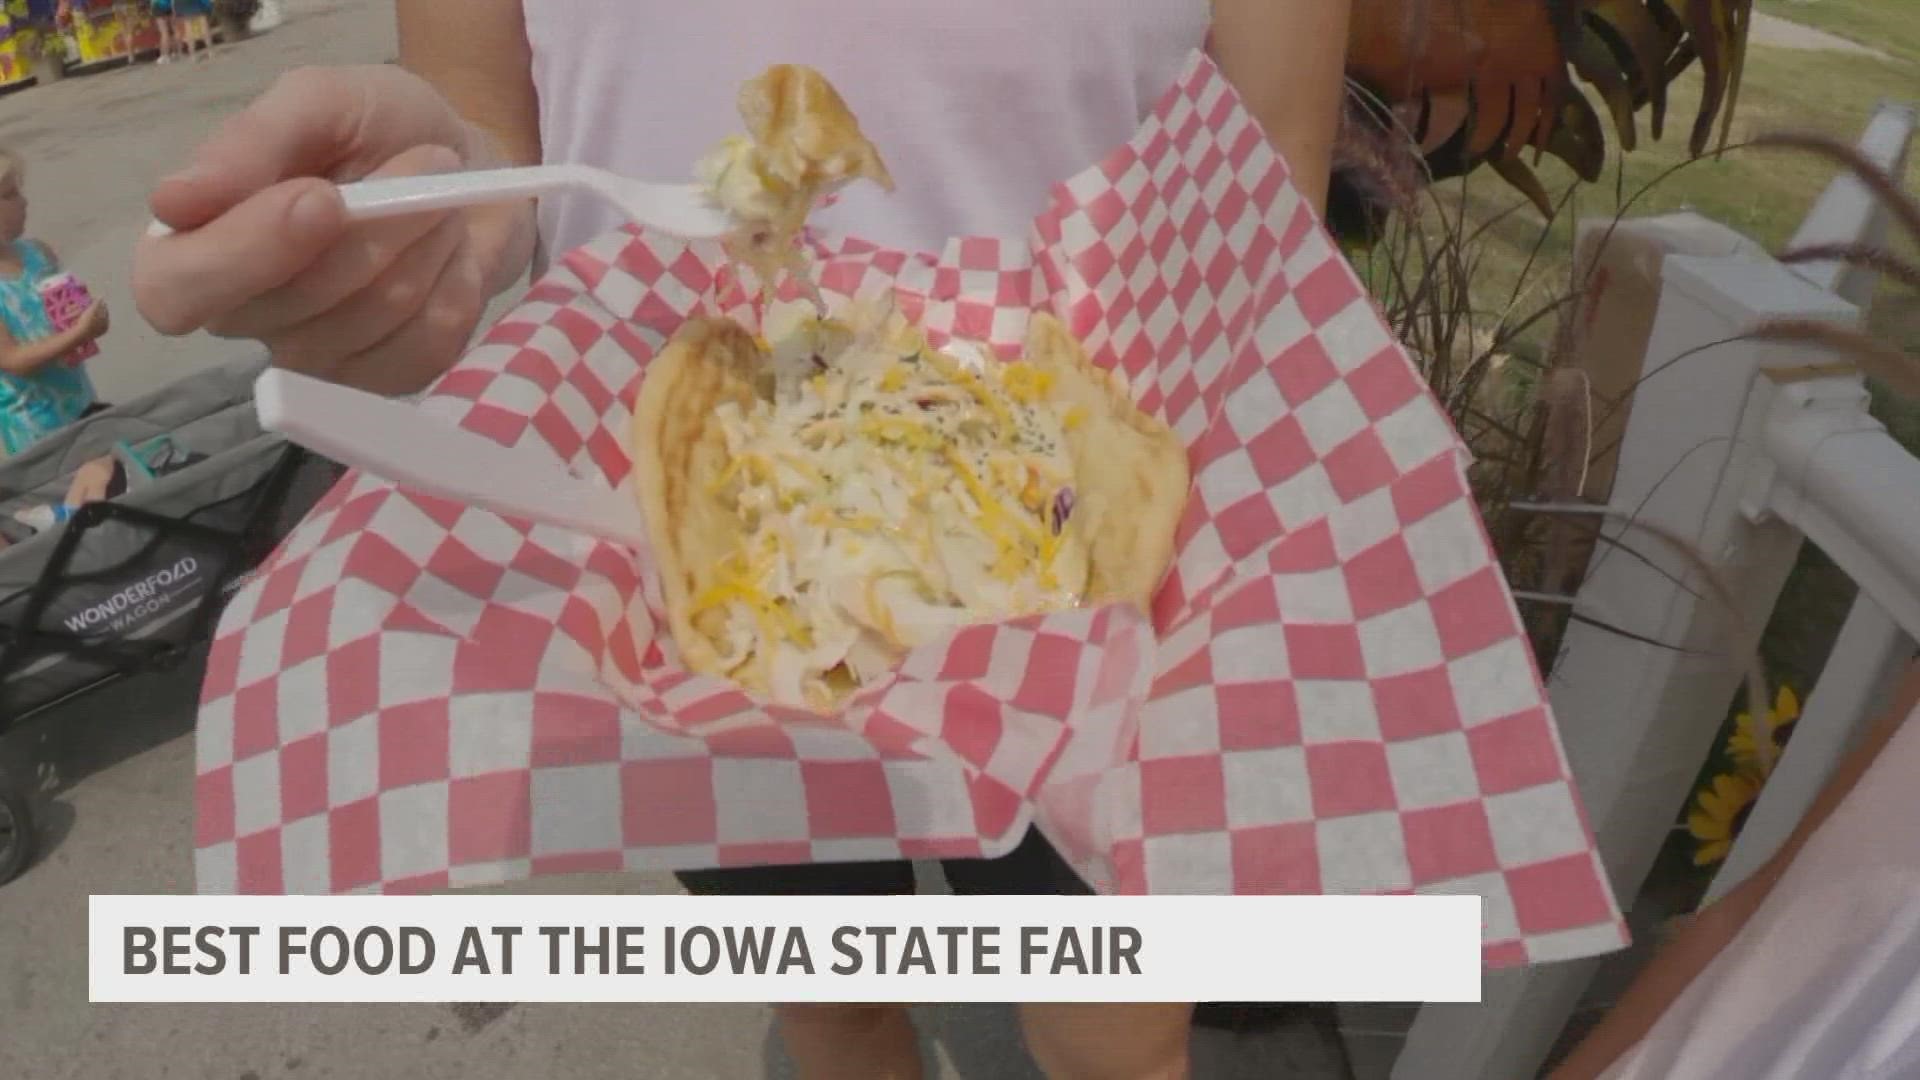 Cluckin' Coop's chicken egg salad with Indian fry bread took home the blue ribbon for best new food at the 2021 Iowa State Fair.